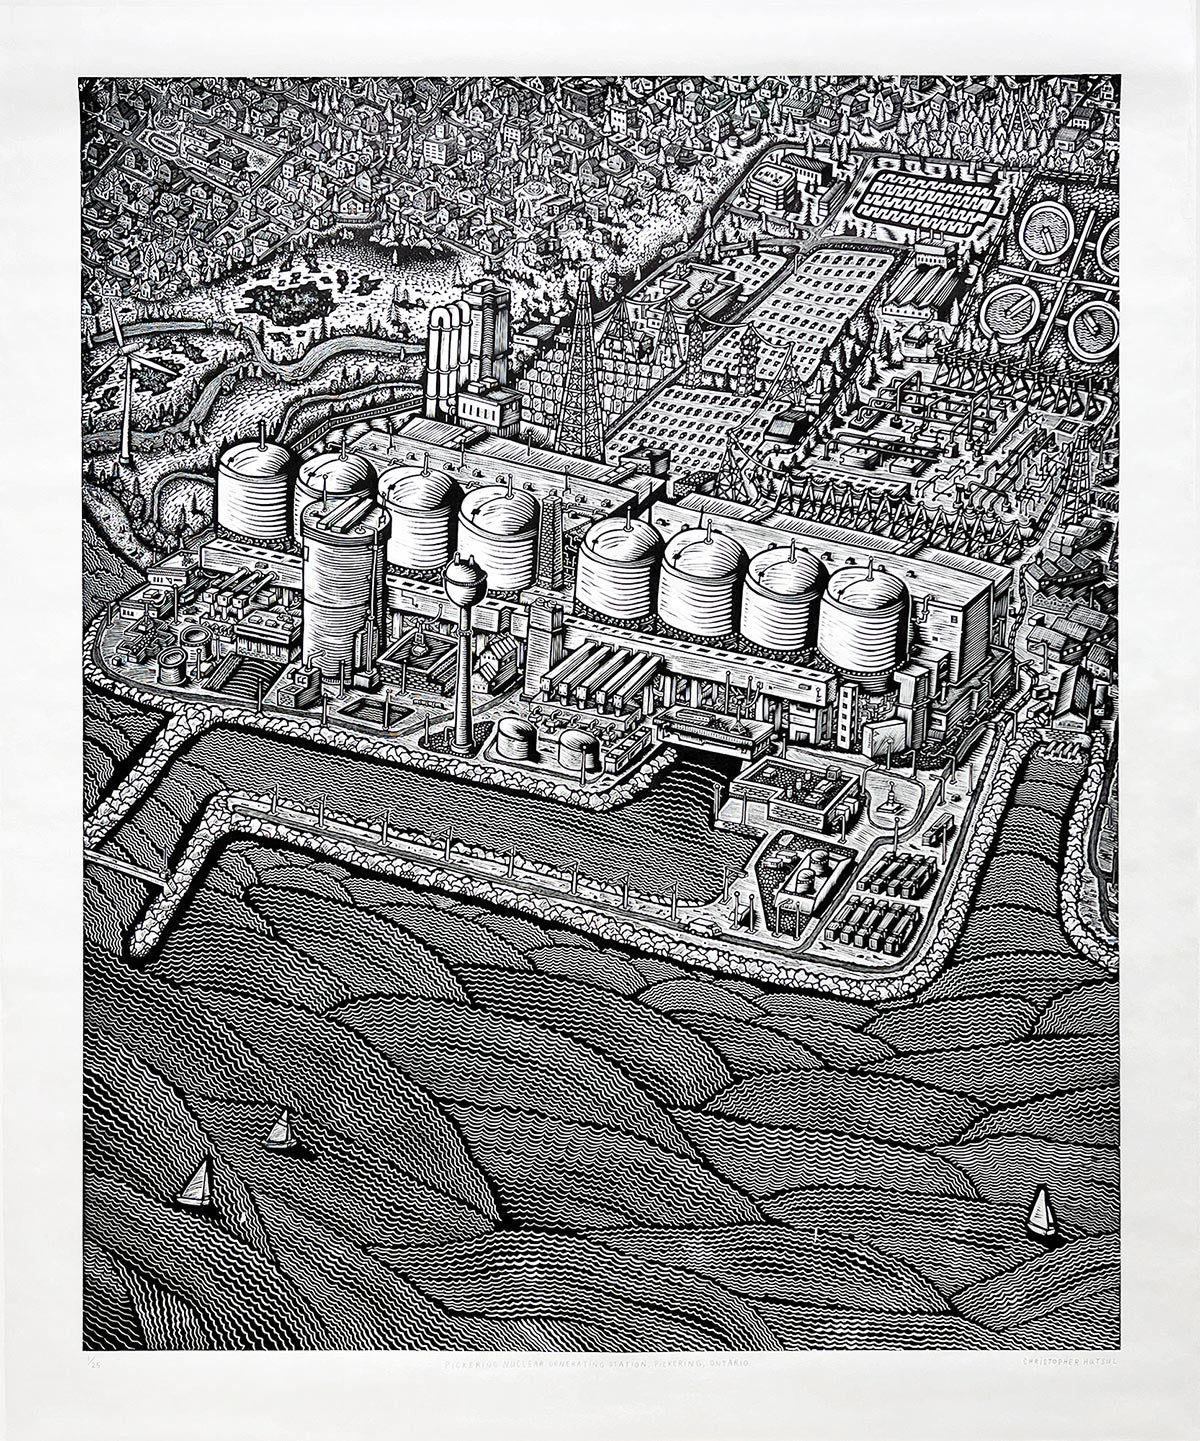 Christopher Hutsul - Pickering Nuclear Generating Station. Pickering, Ontario